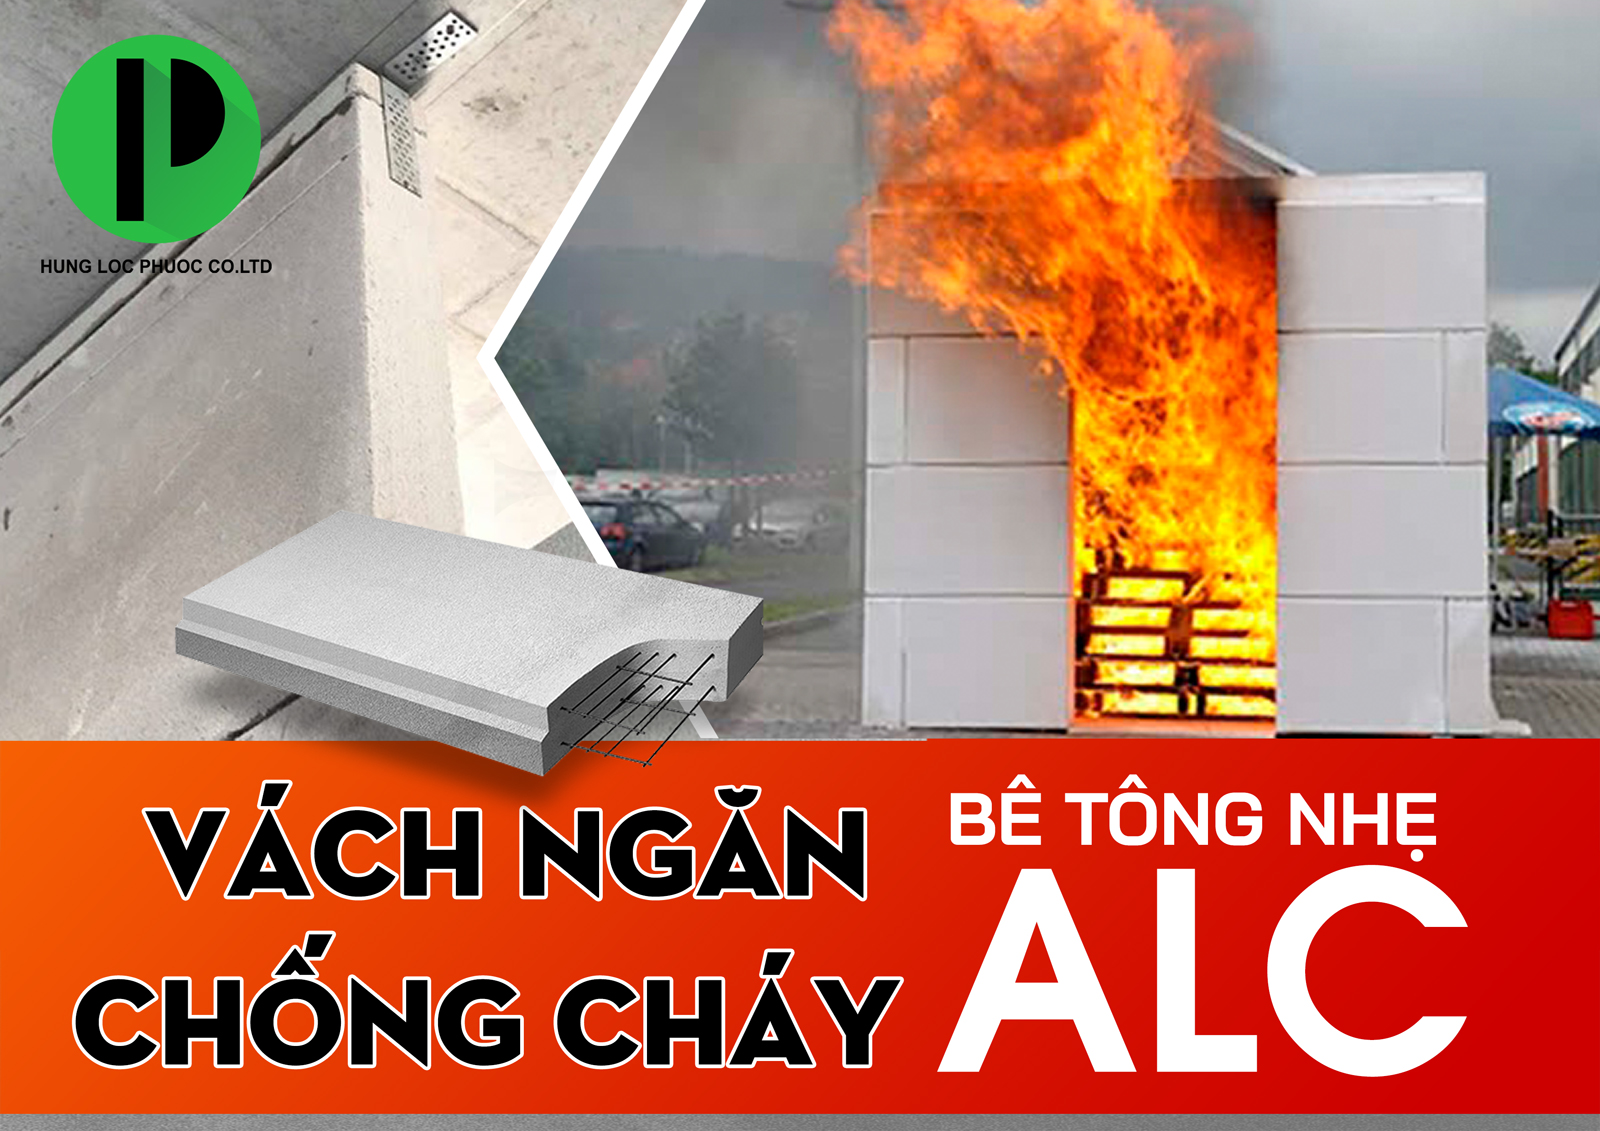 be-tong-nhe-alc